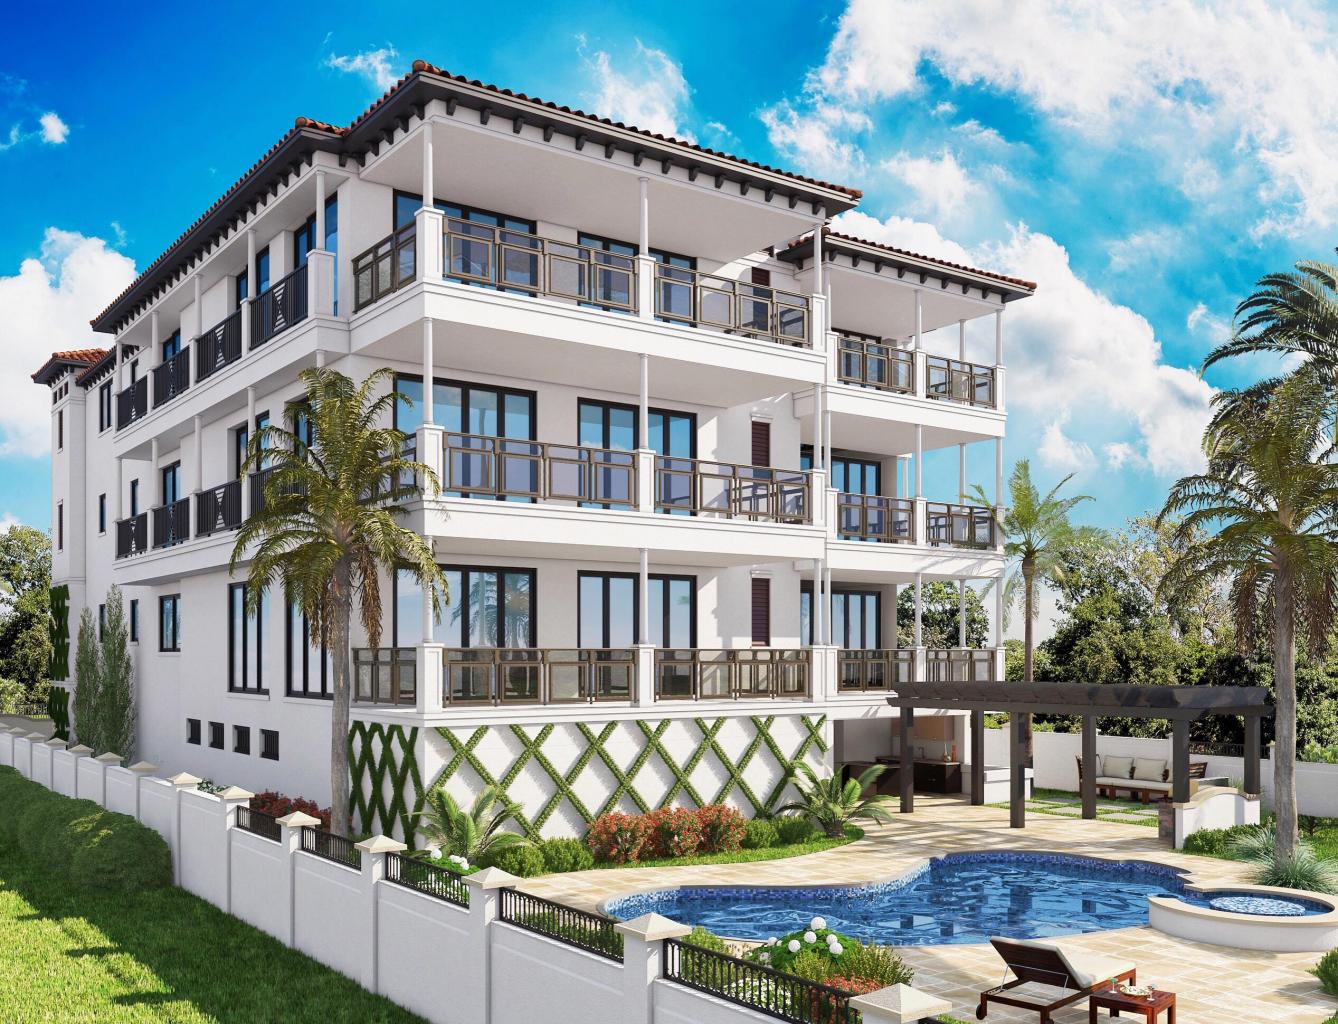 Addison Palm Beach Shores Condos For Sale on Singer Island